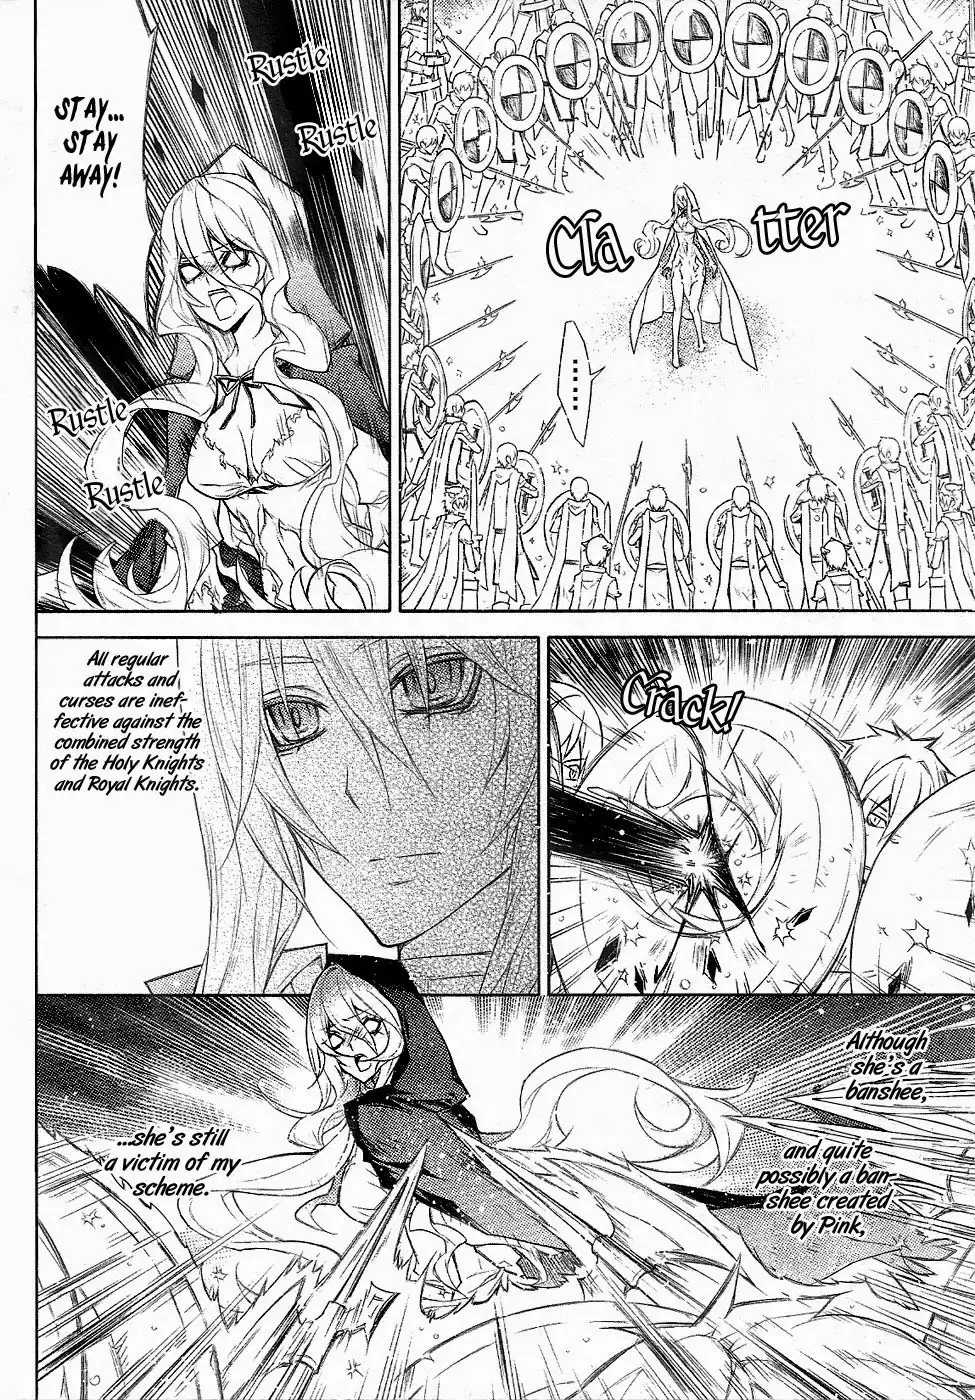 Legend of the Sun Knight Chapter 20